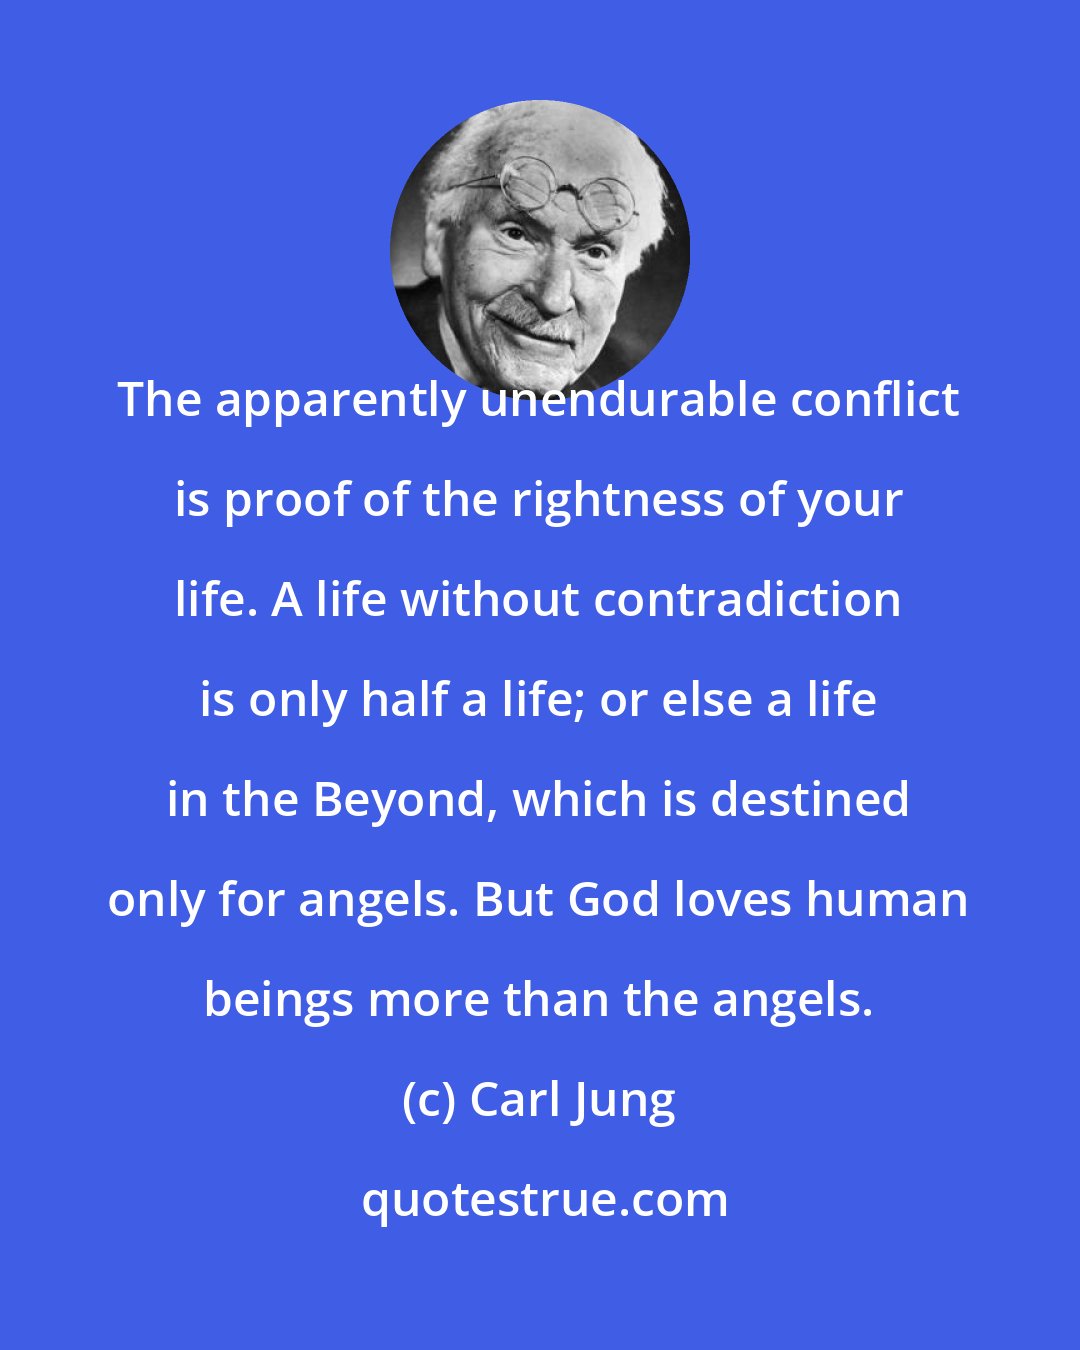 Carl Jung: The apparently unendurable conflict is proof of the rightness of your life. A life without contradiction is only half a life; or else a life in the Beyond, which is destined only for angels. But God loves human beings more than the angels.